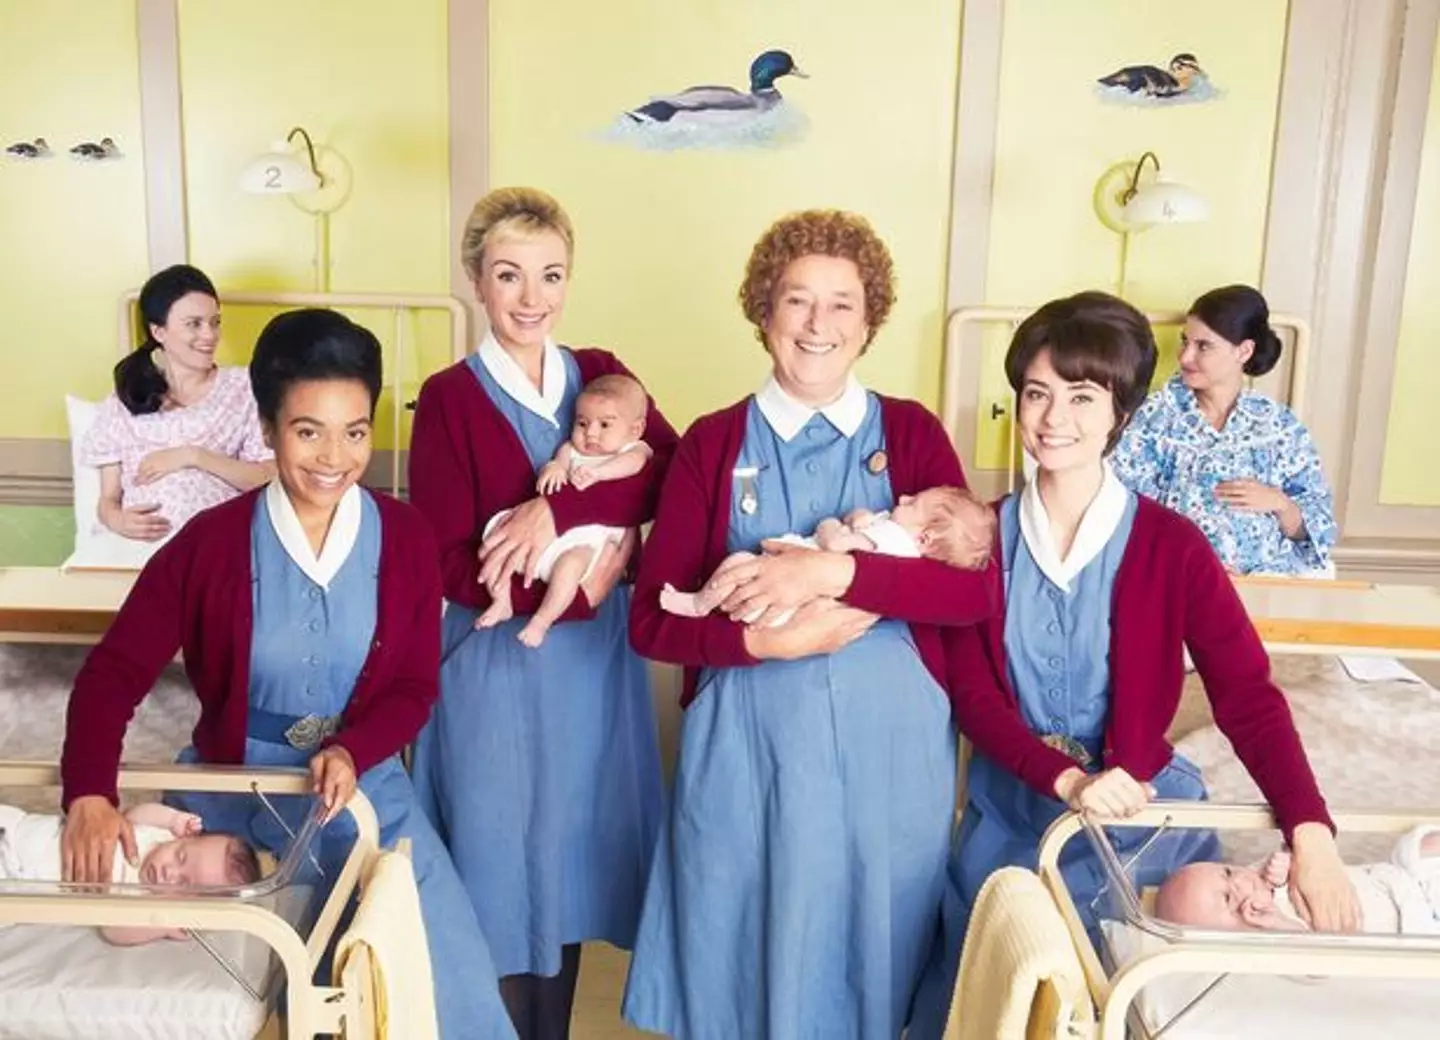 A baby has been rushed to the hospital during filming for the newest season of Call The Midwife.